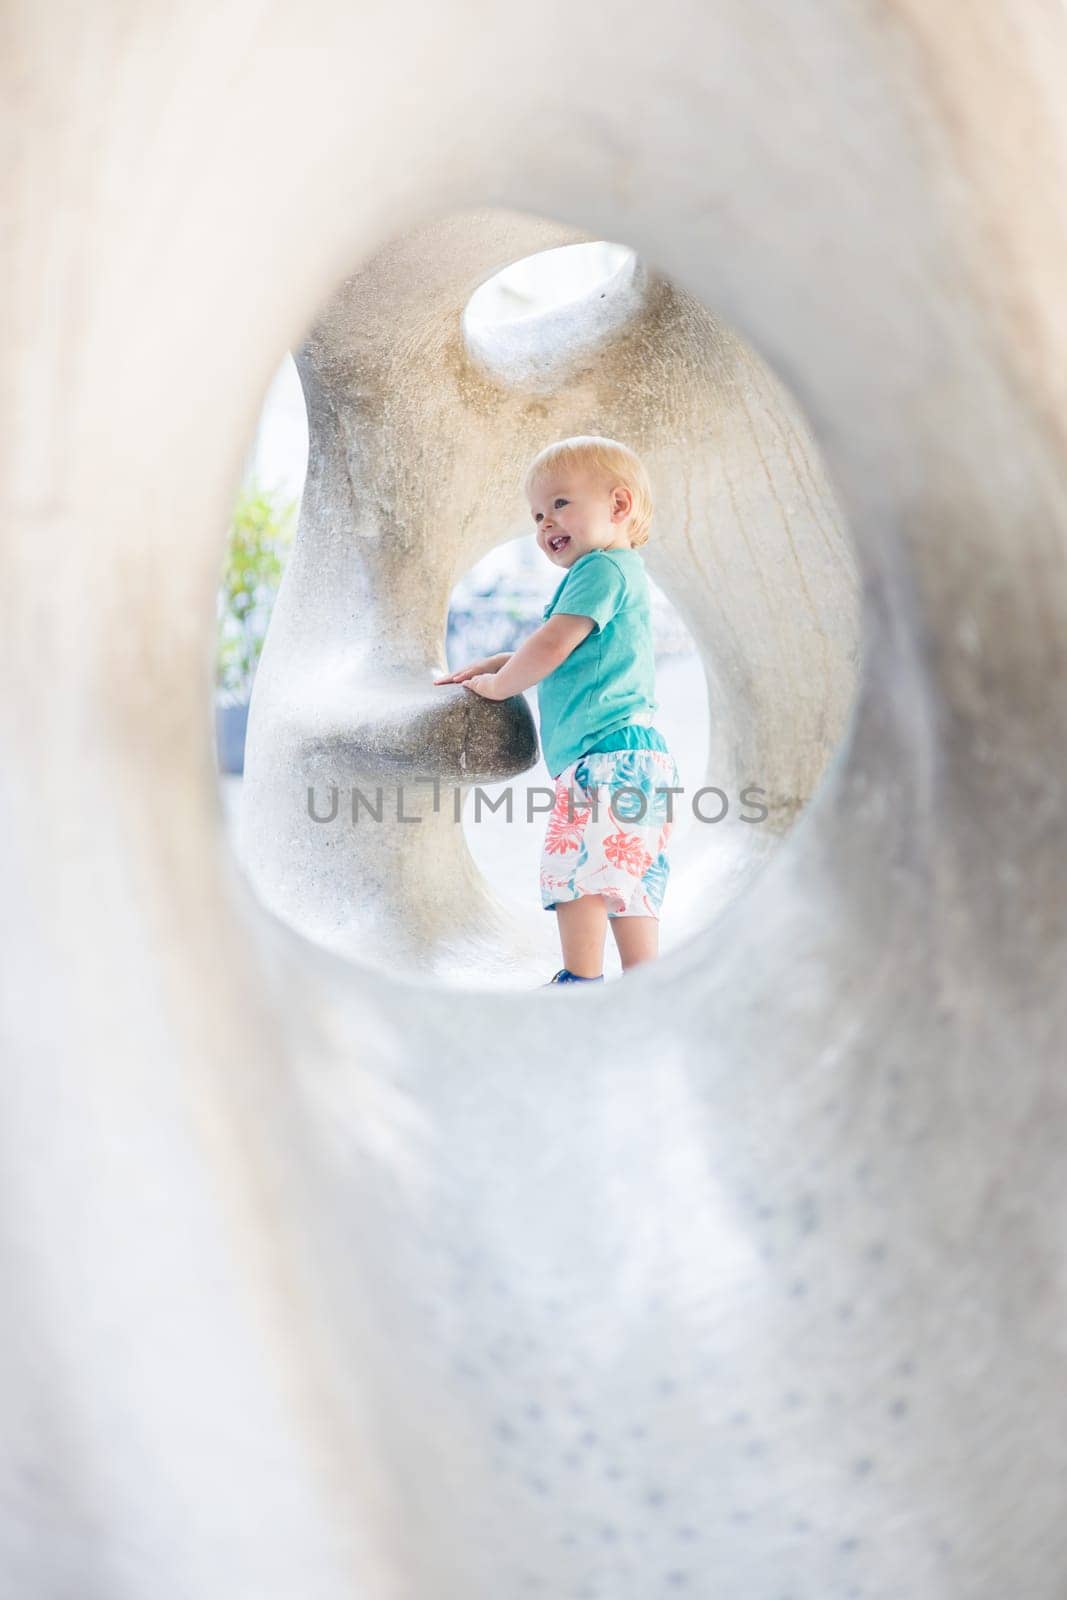 Child playing on outdoor playground. Toddler plays on school or kindergarten yard. Active kid on stone sculpured slide. Healthy summer activity for children. Little boy climbing outdoors. by kasto